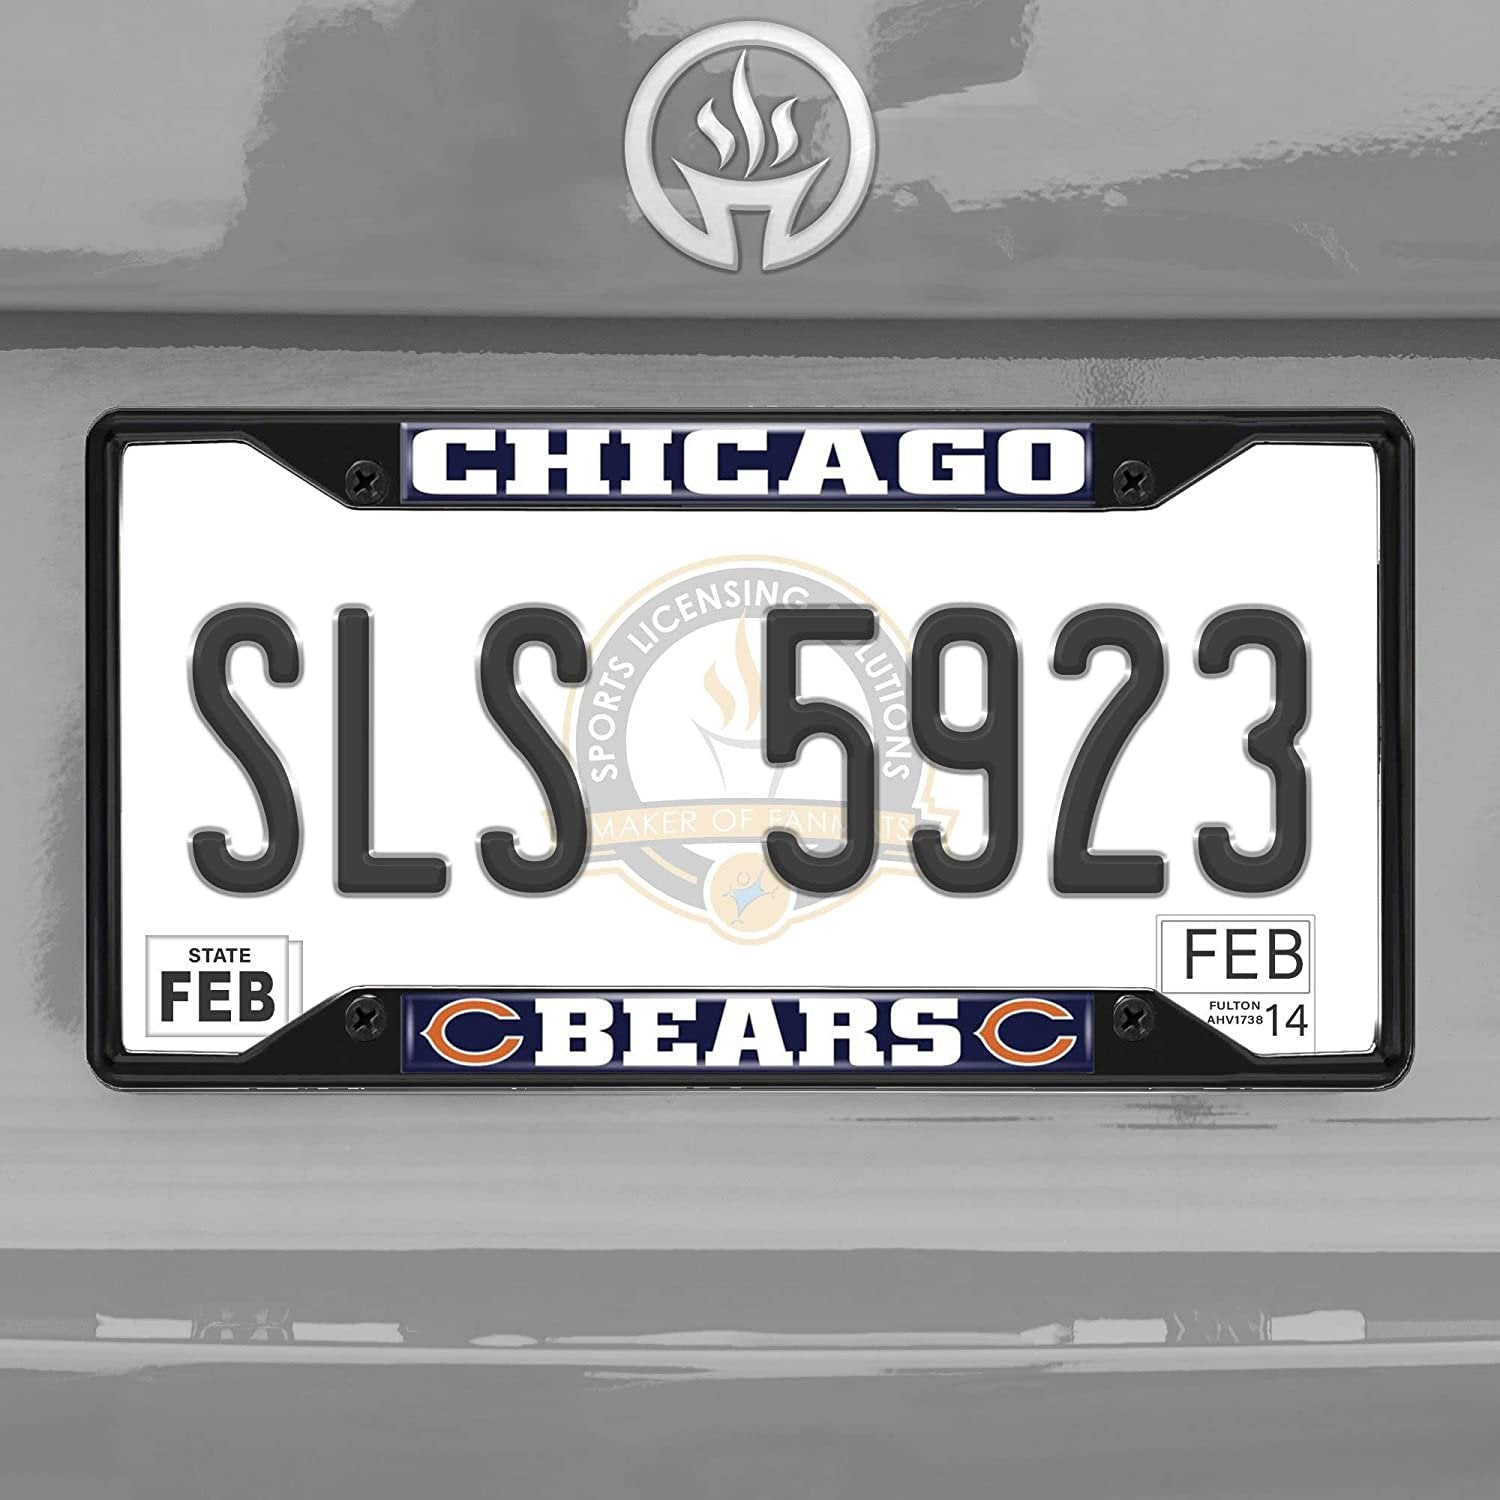 Chicago Bears Black Metal License Plate Frame Tag Cover 6.25x12.25 Inches